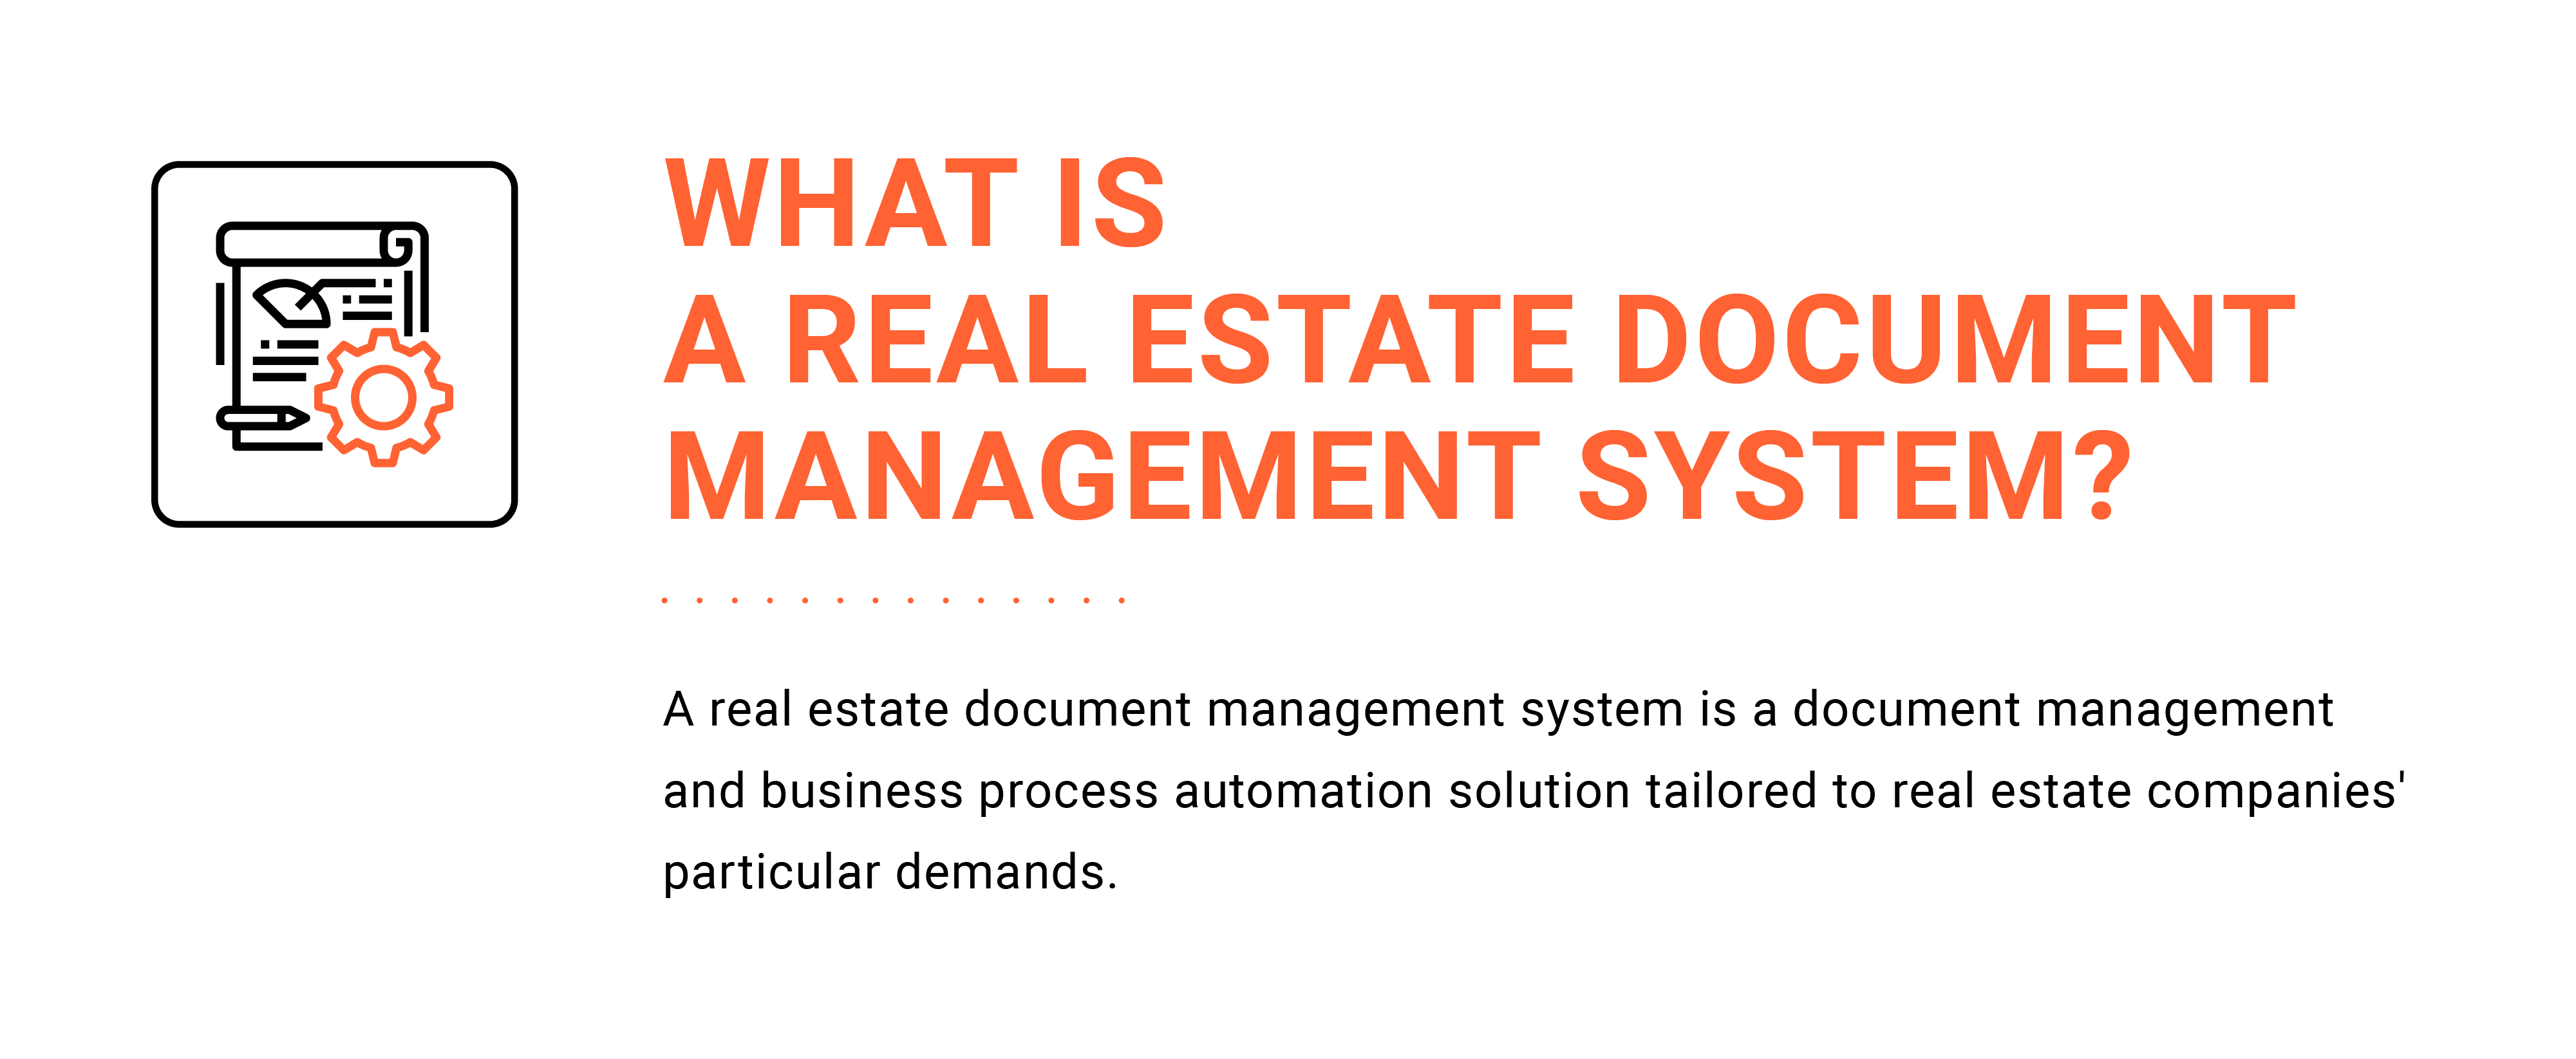 Definition of a document management system for real estate